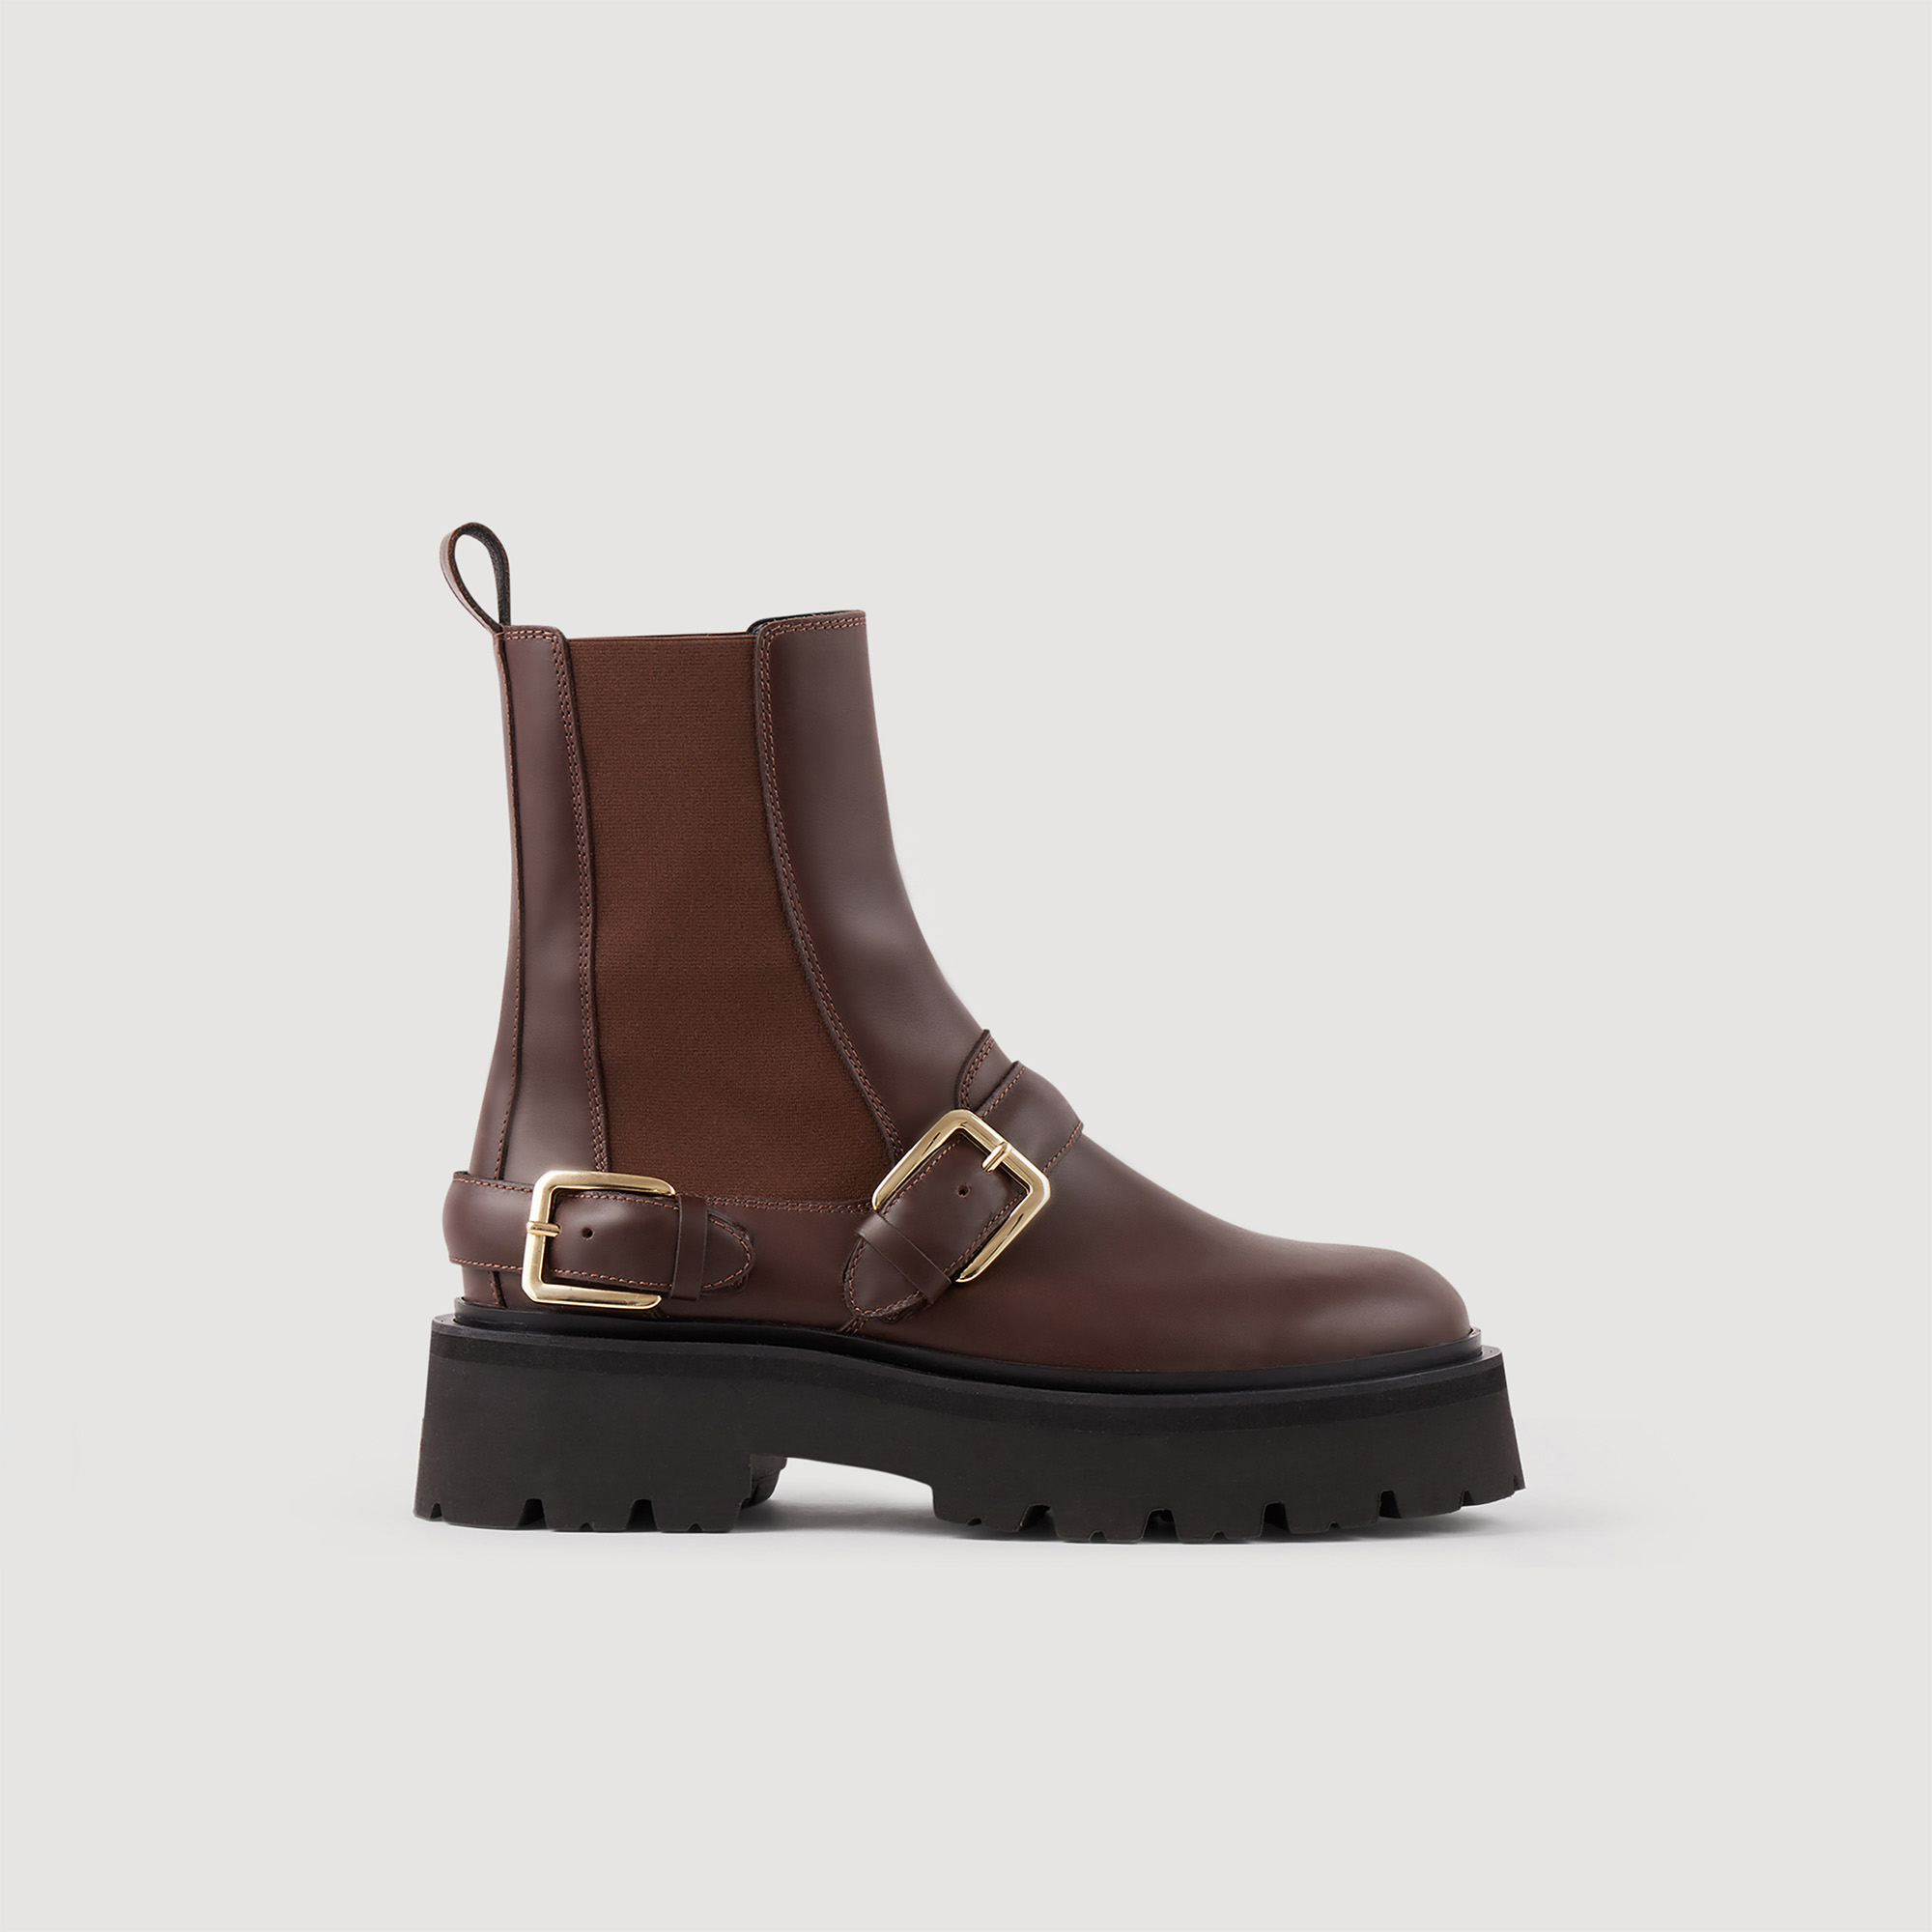 Sandro ethylene vinyl acetate Accessories: pig Leather: Leather, biker-style ankle boots with round toes, chunky platform soles, elasticated panels at the sides and trimmed with straps with metal buckles